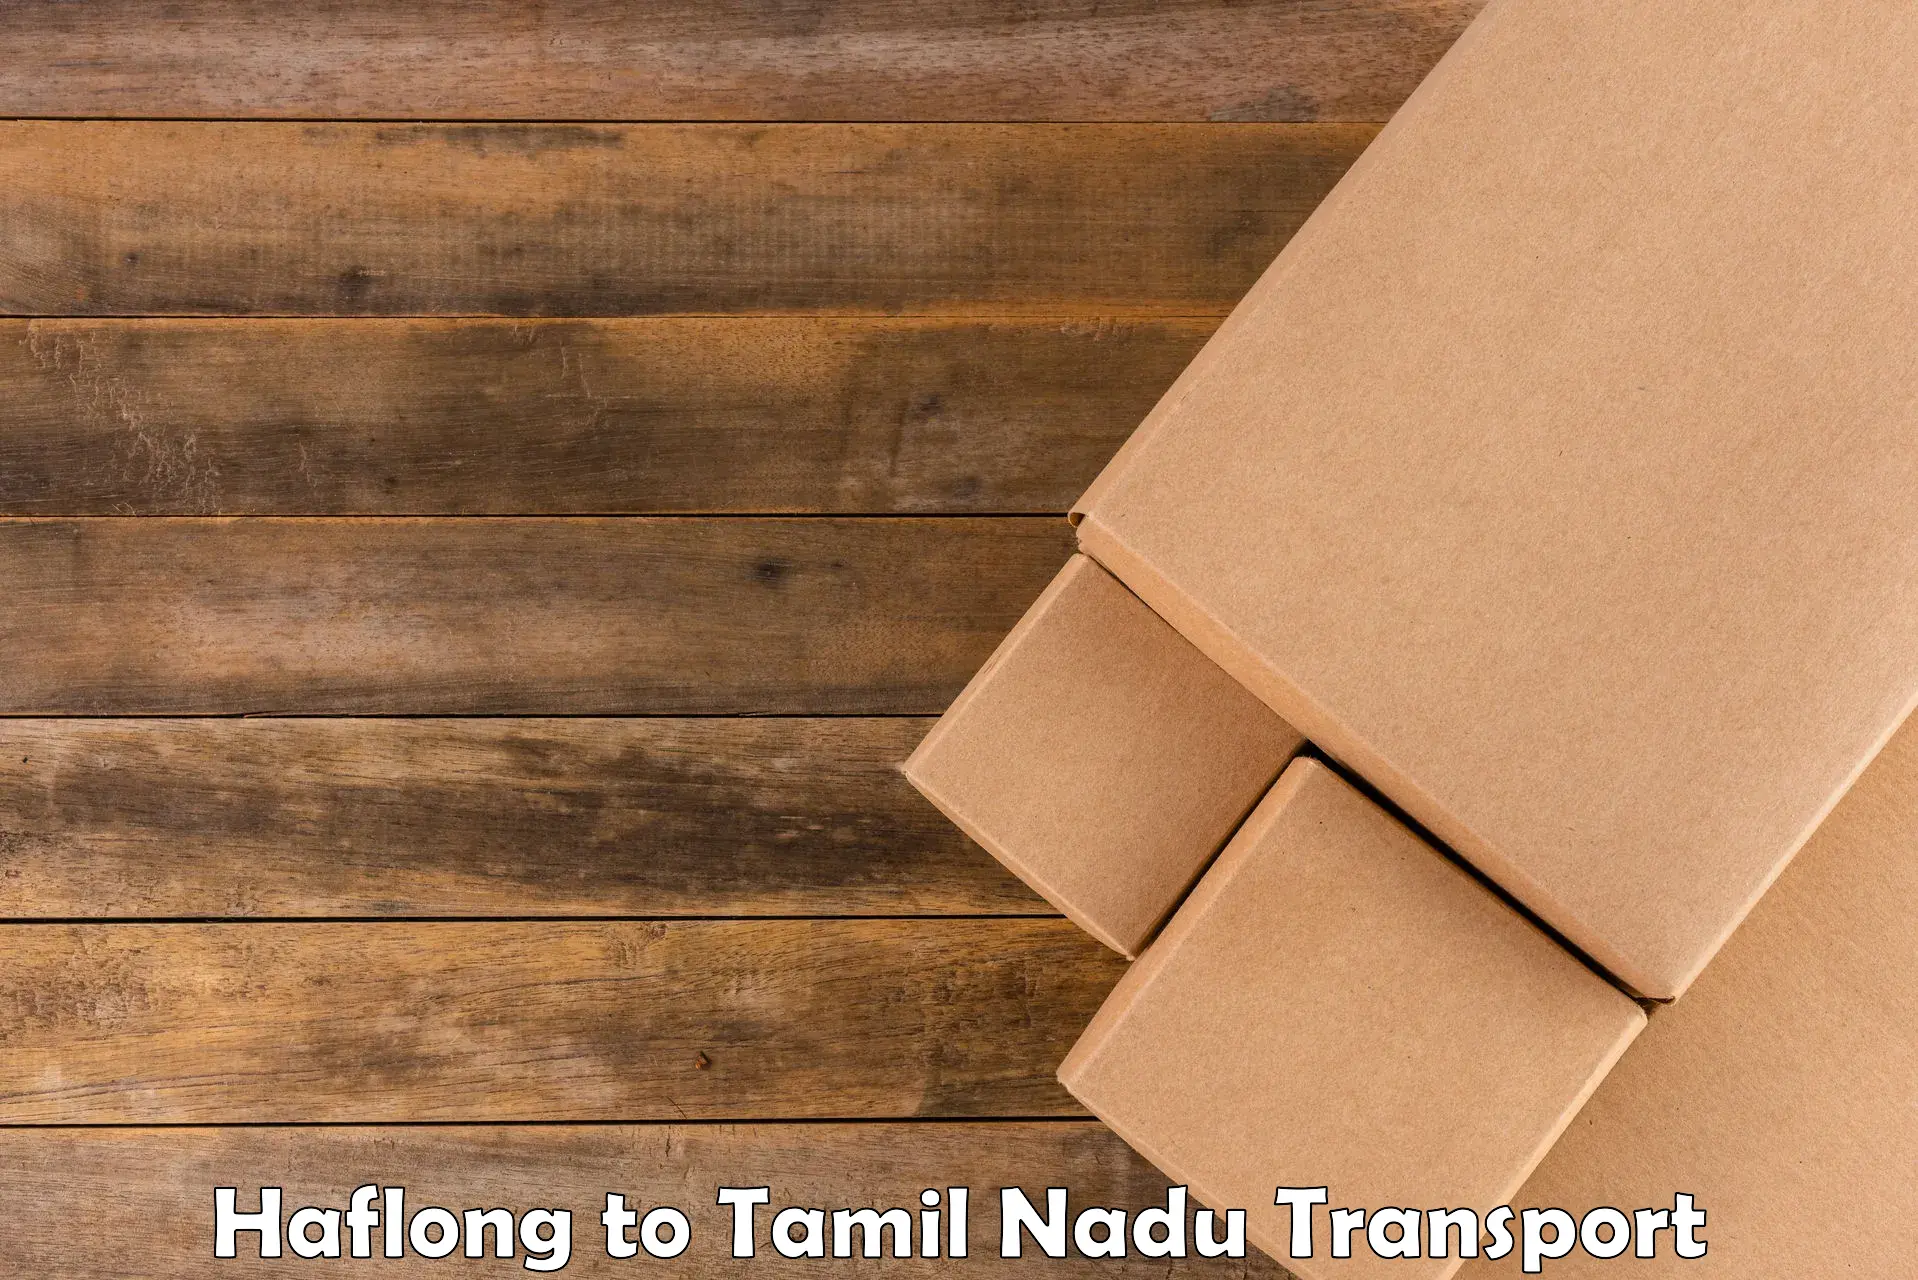 Truck transport companies in India Haflong to Tamil Nadu